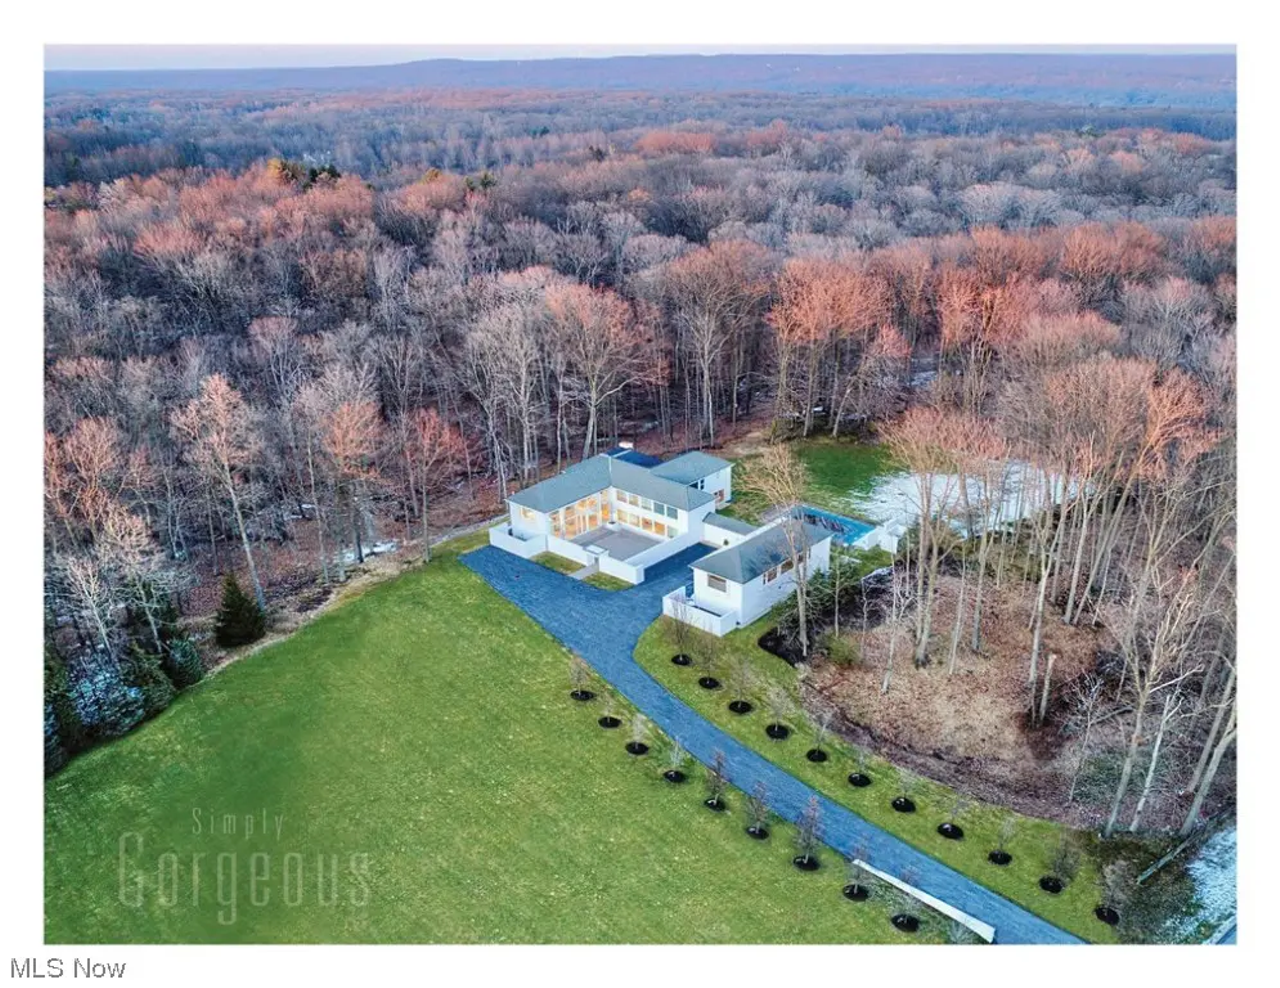 Toby Cosgrove's Former Hunting Valley Mansion Just Hit The Market For $2,850,000